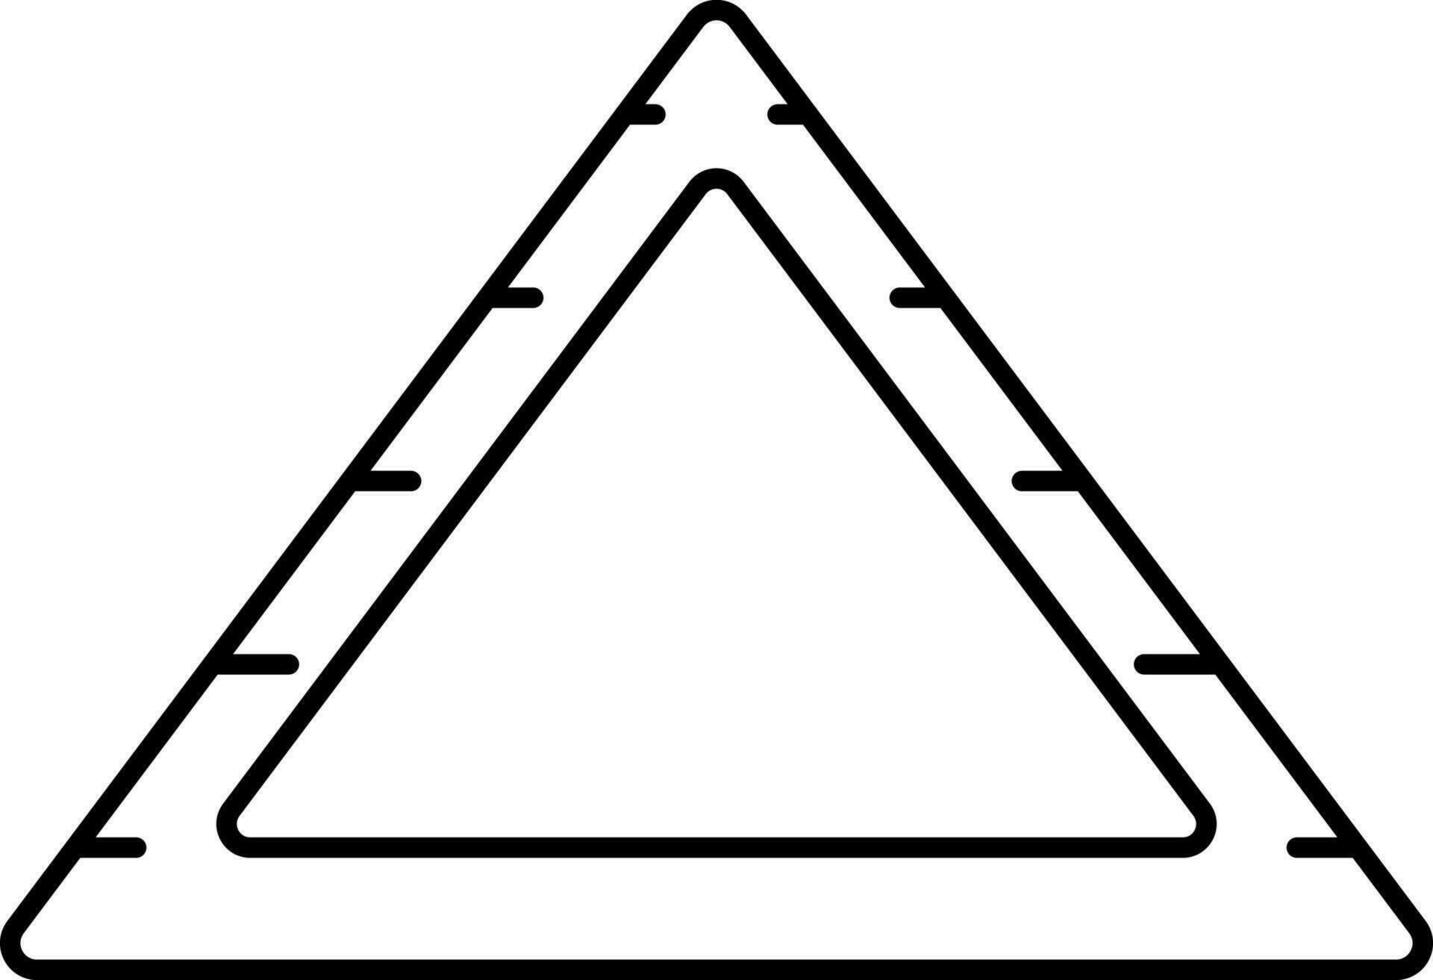 Black Outline Illustration Of Triangle Ruler Scale Icon. vector